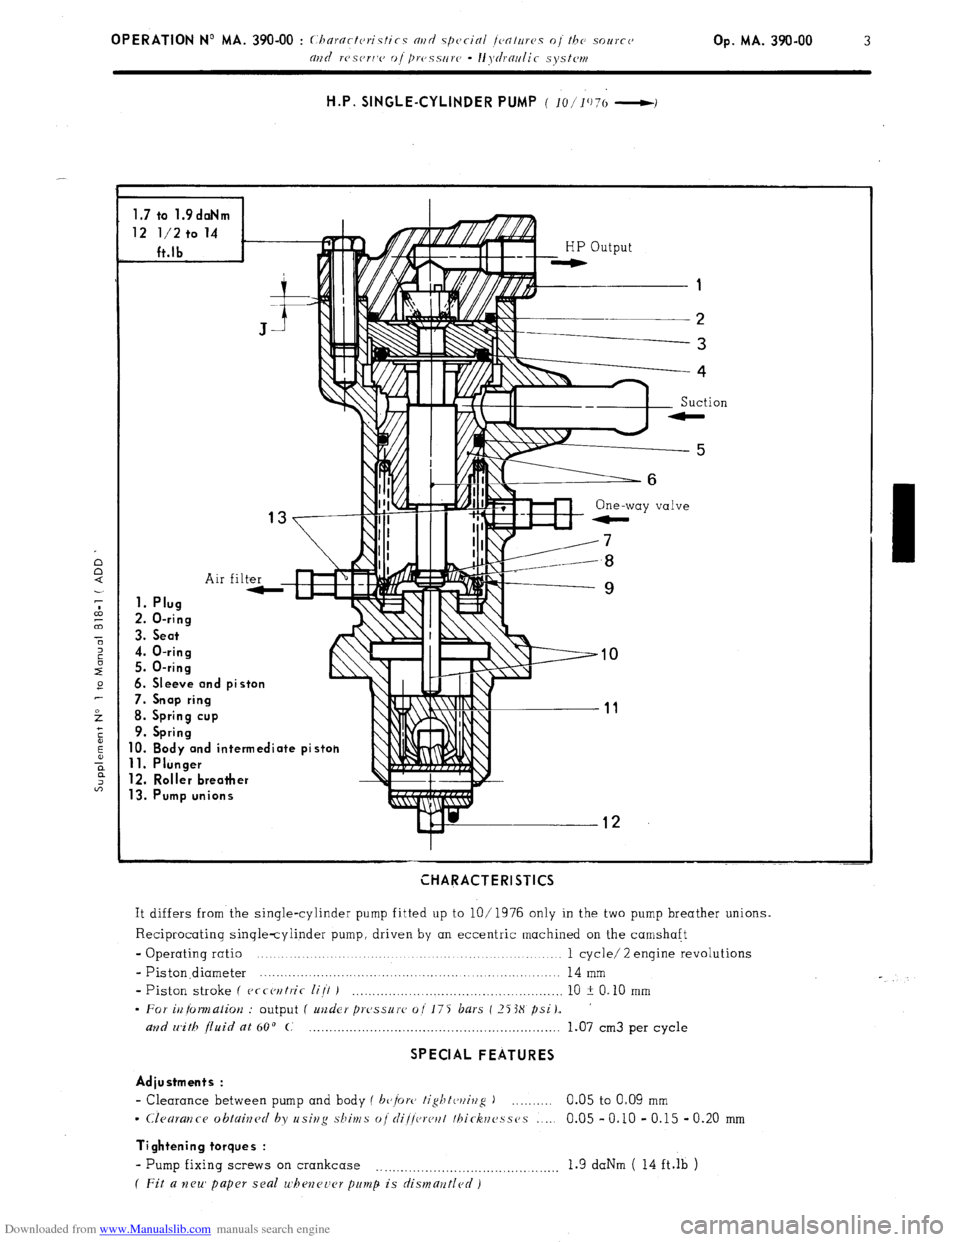 Citroen CX 1981 1.G Service Manual Downloaded from www.Manualslib.com manuals search engine H.P. SINGLE-CYLINDER PUMP ( 10/‘1’)7(, -I 
1.7 to 1.9daNm 
12 l/2 to 14 
ft.lb 
1. Plua 
2.0-= -ring 
3. Seat 
4. O-ring 
5. O-ring 
6. Sle